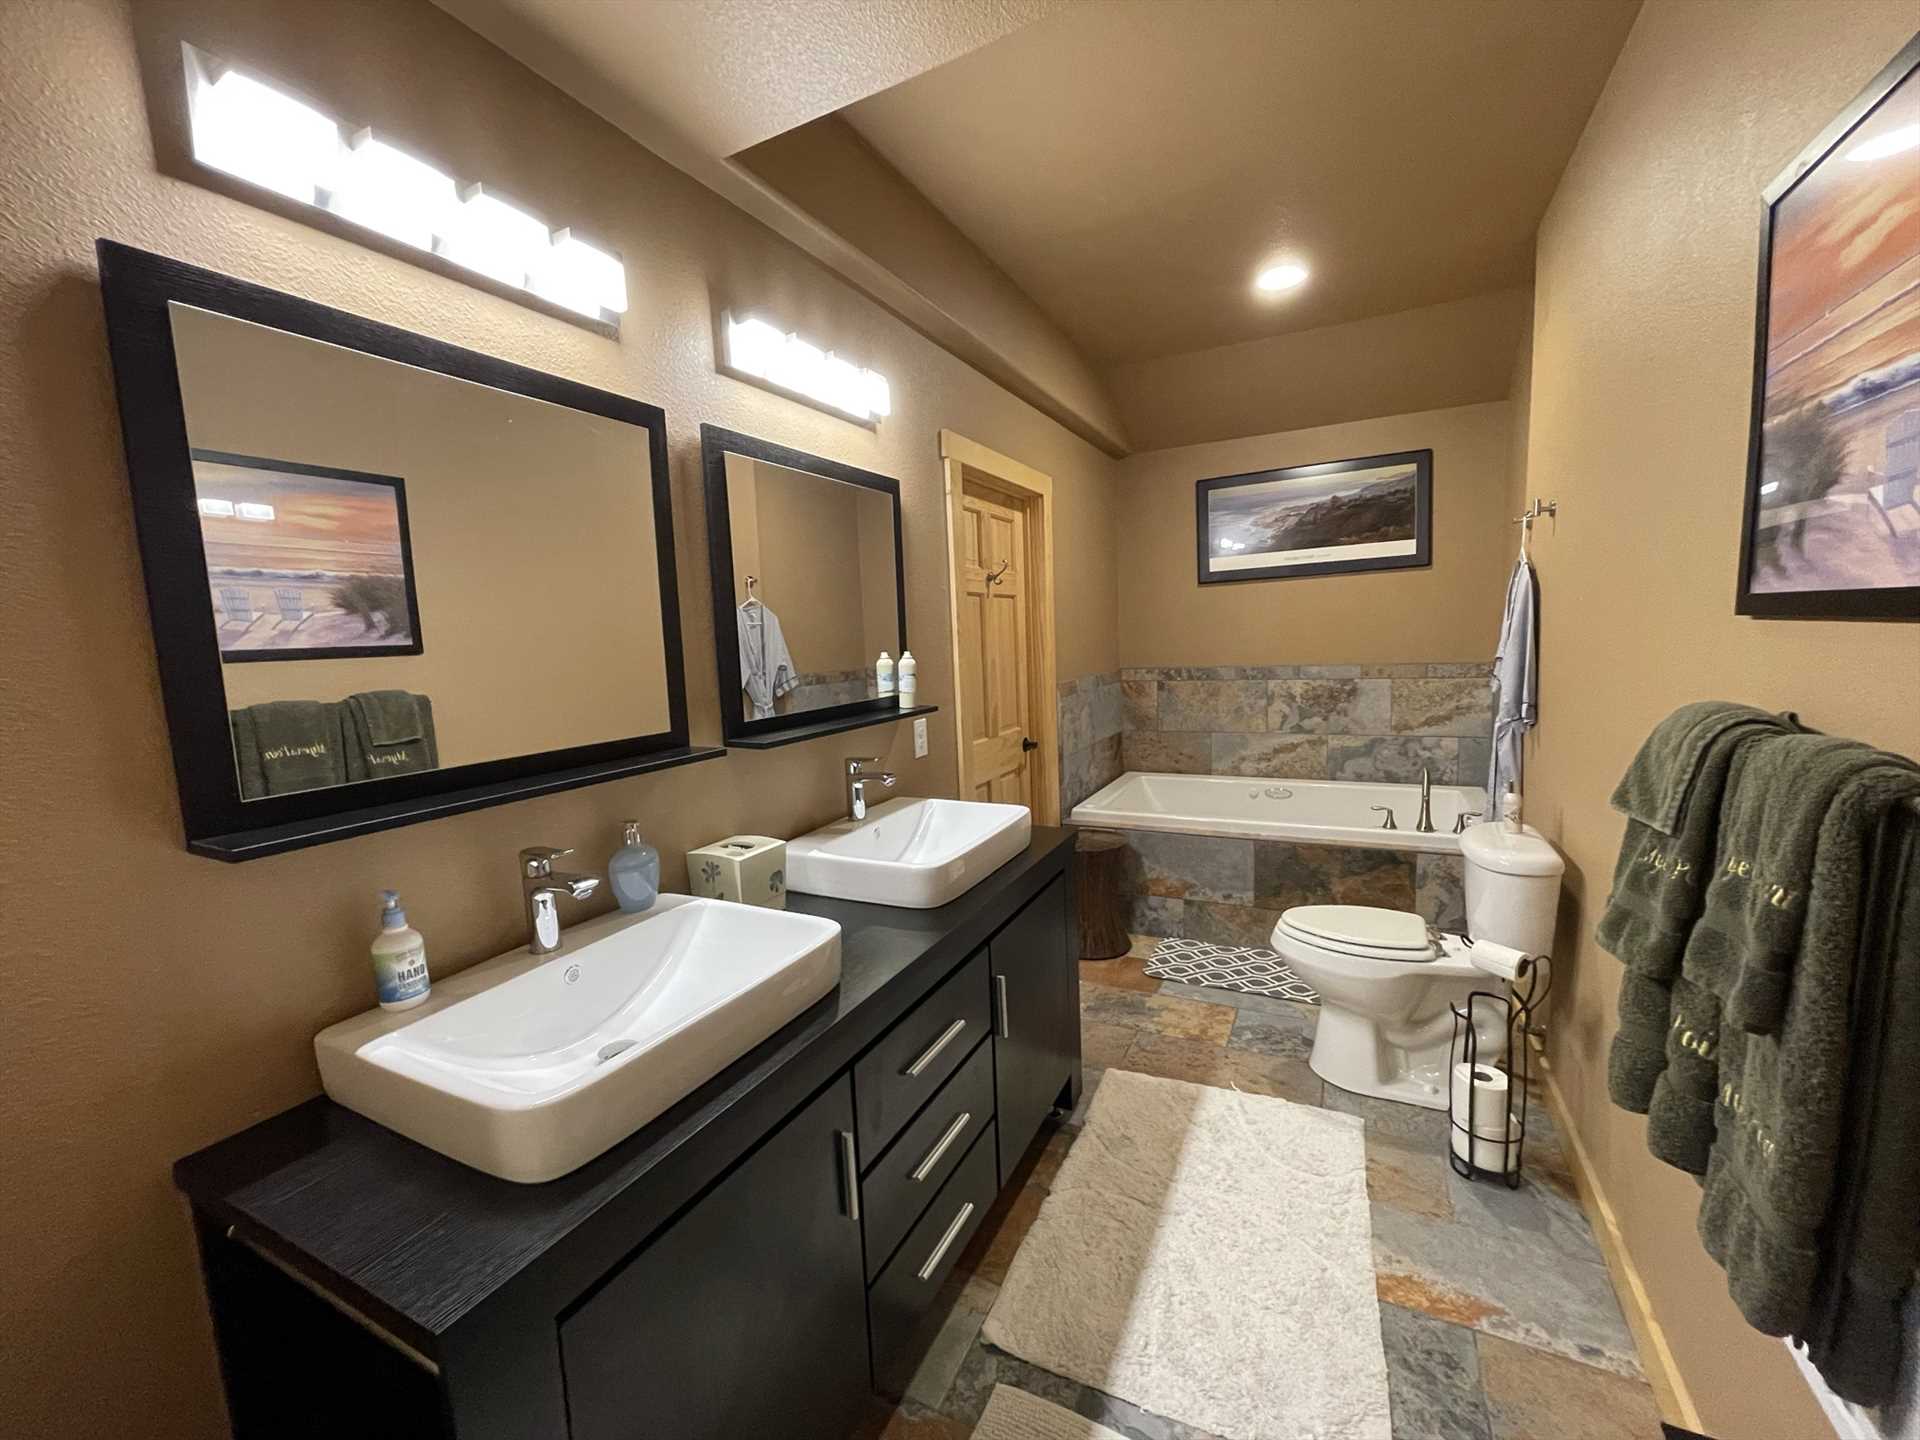                                                 Modern decor and twin vanities highlight the first bathroom at Bandera Ridge-not to mention a roomy and relaxing Jacuzzi tub!